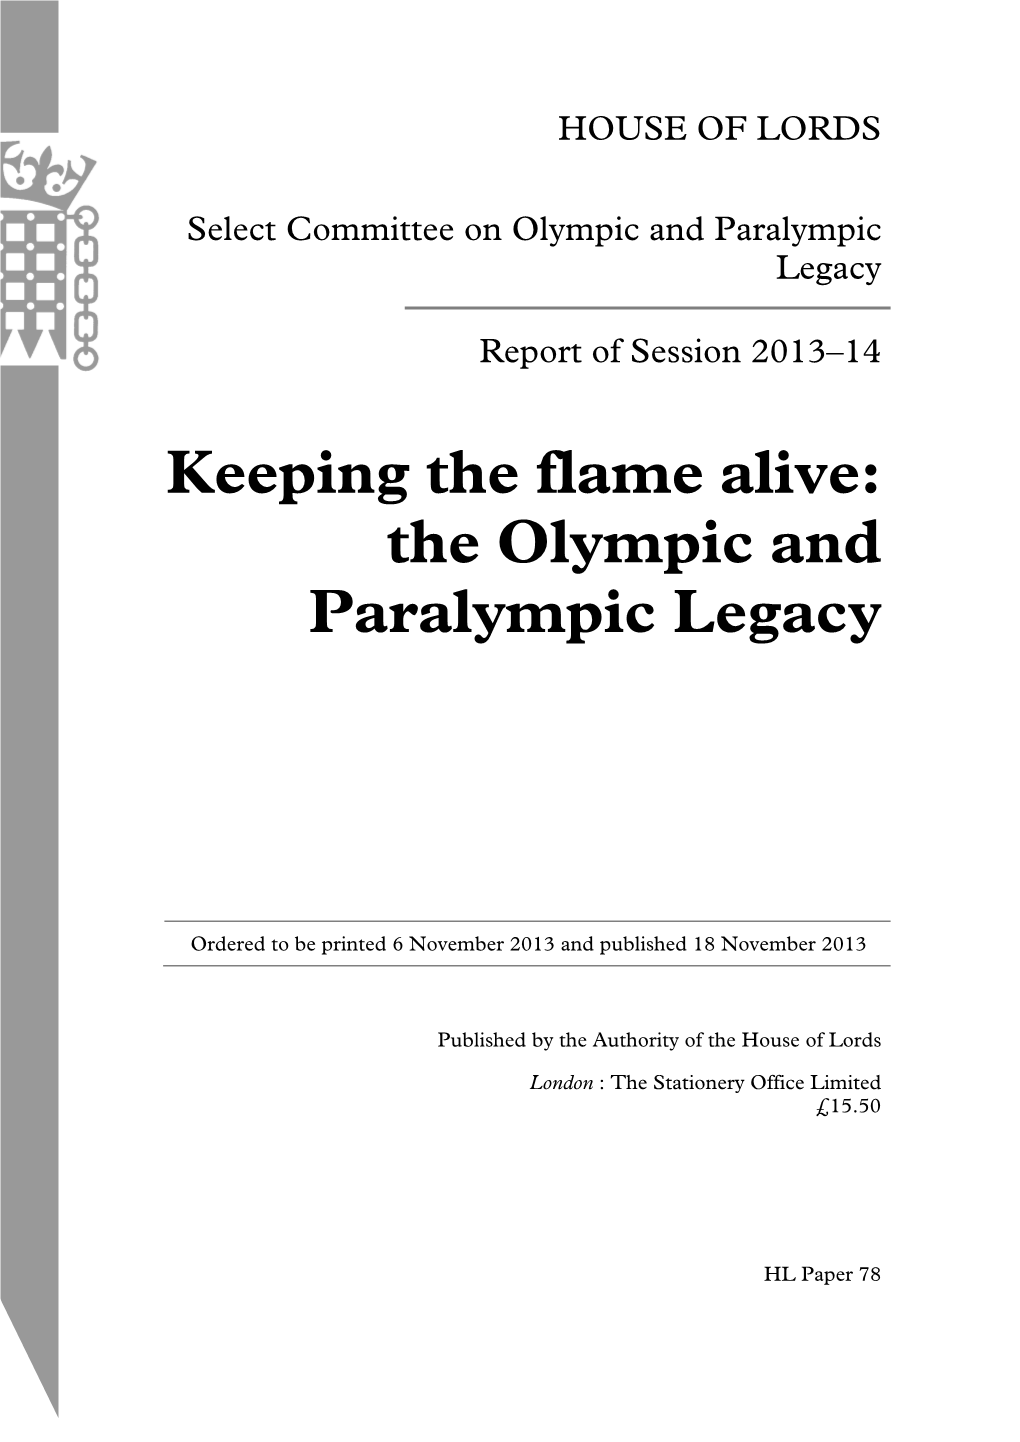 The Olympic and Paralympic Legacy